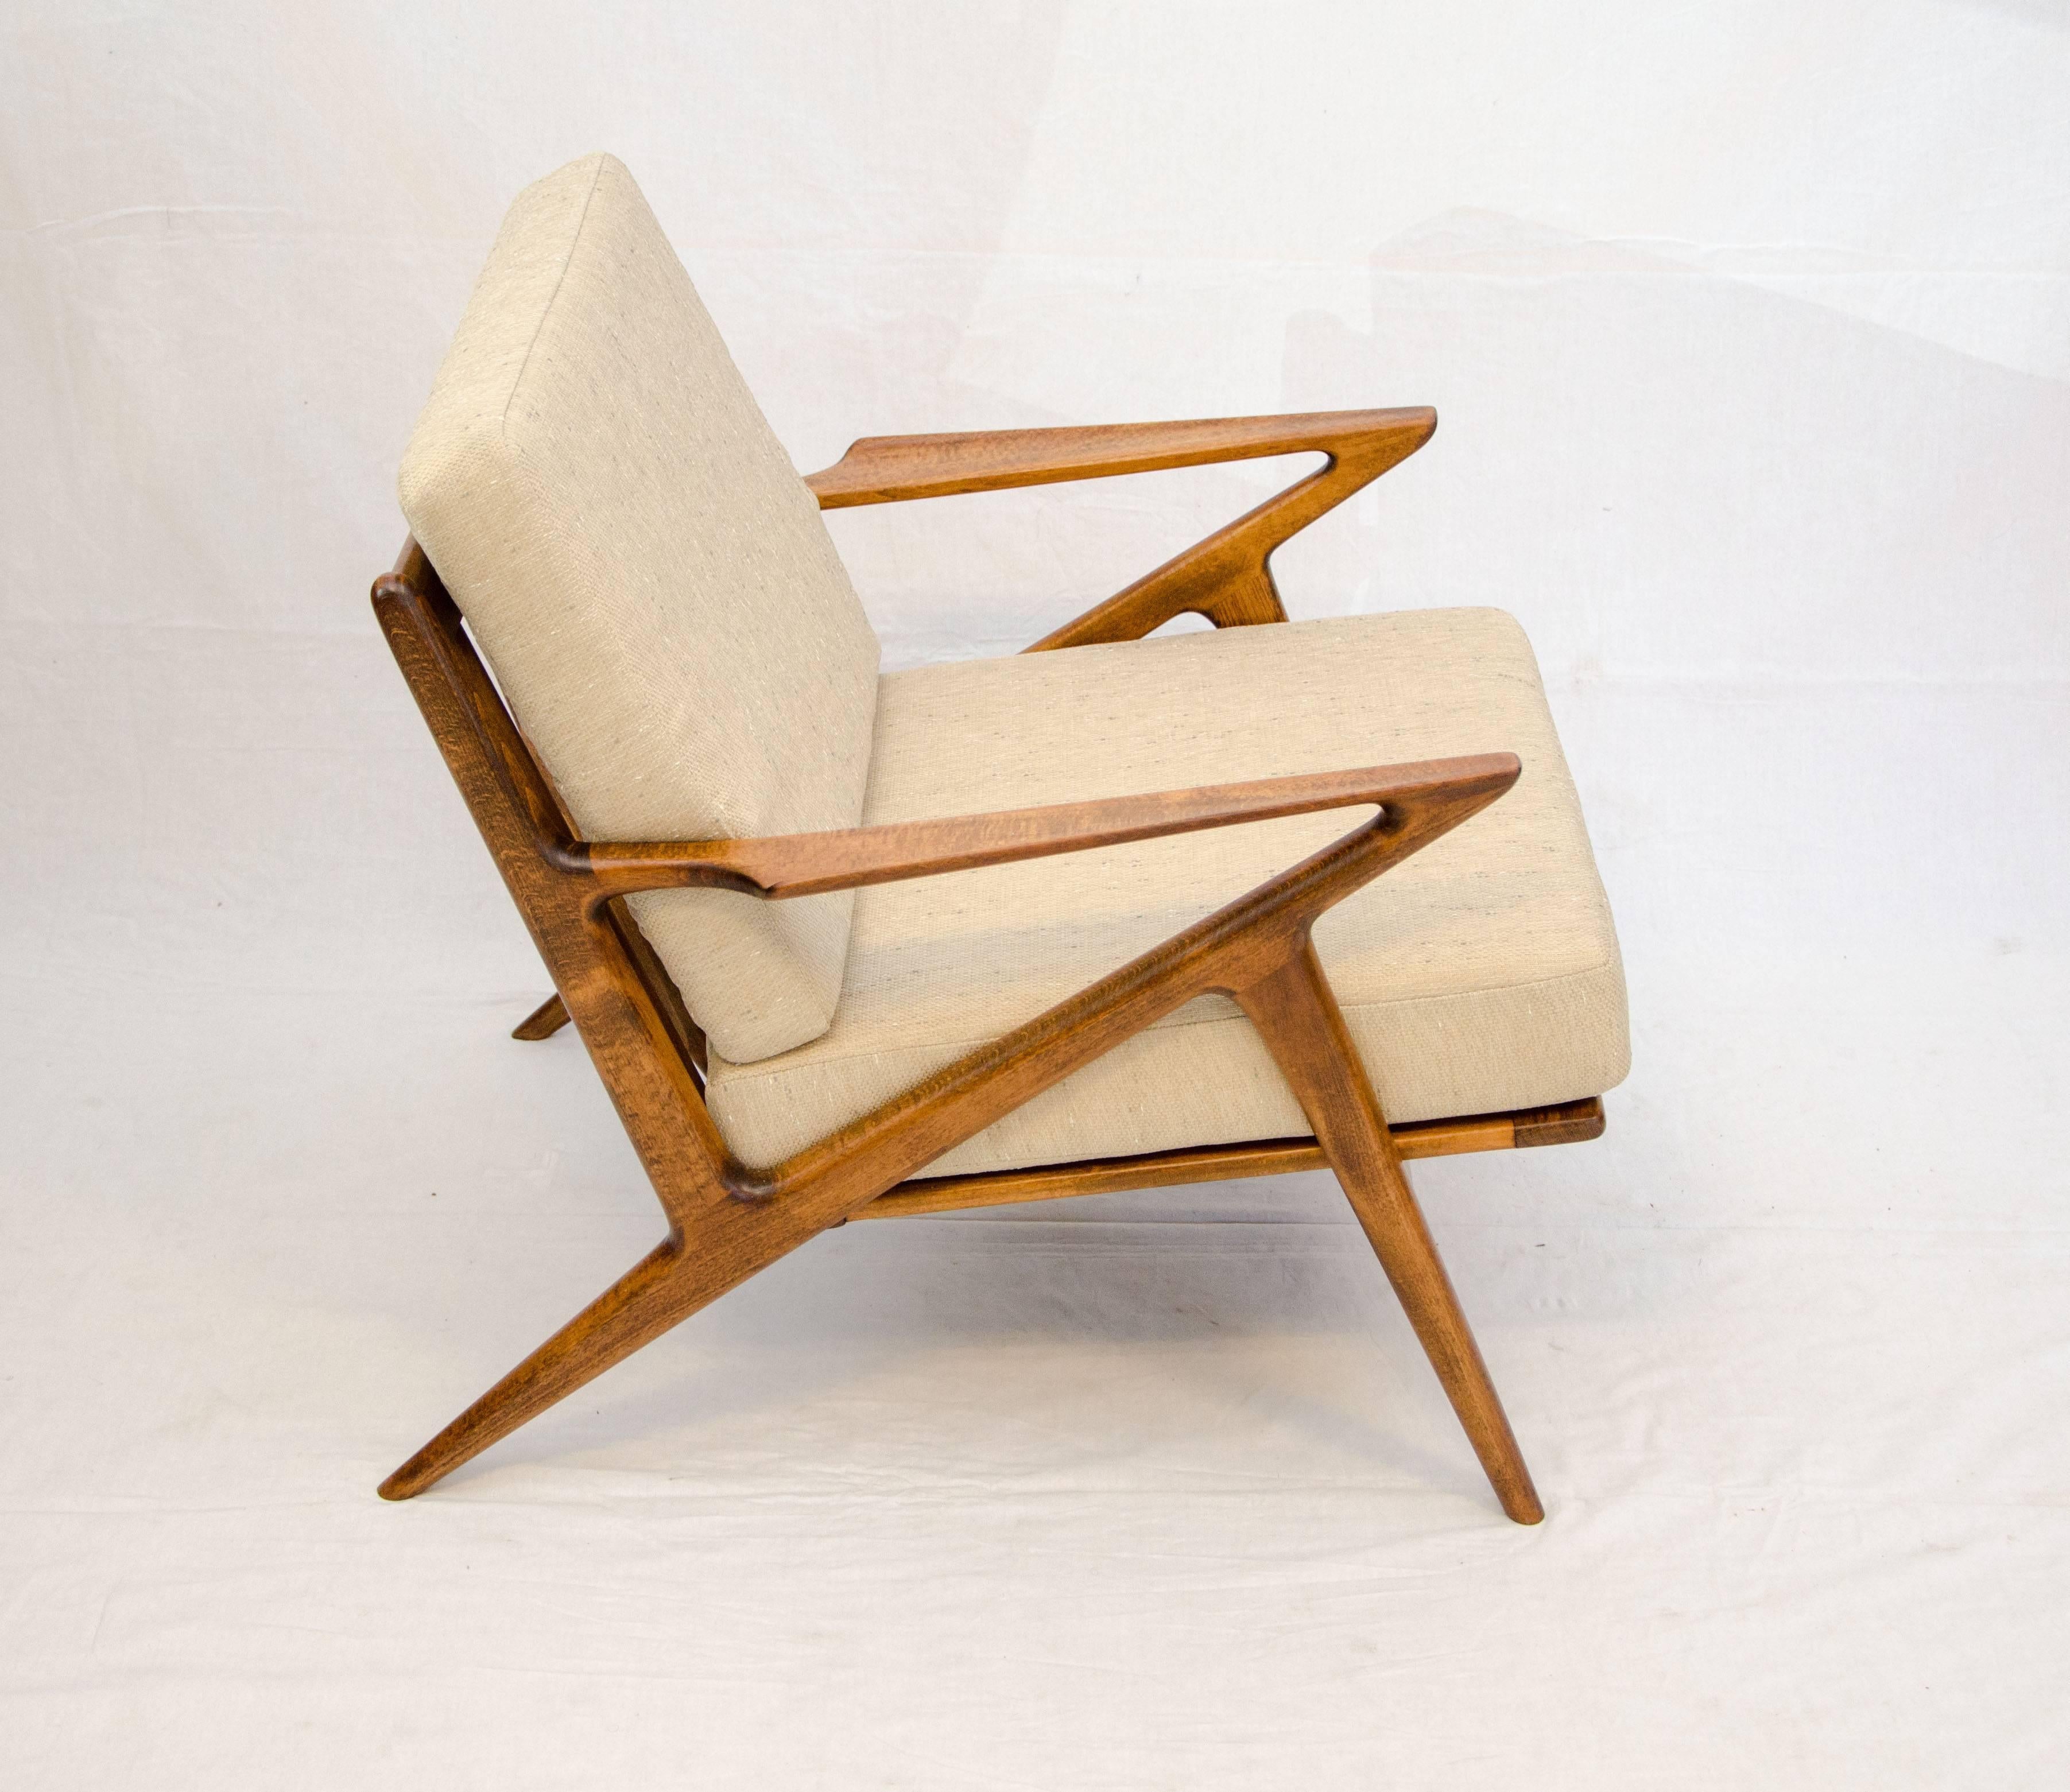 This popular Z lounge chair is always a favorite. This is birch with a teak finish and displays nice wood grain patterns on the arms as well as an upturned edge. It has a great looking angular design.